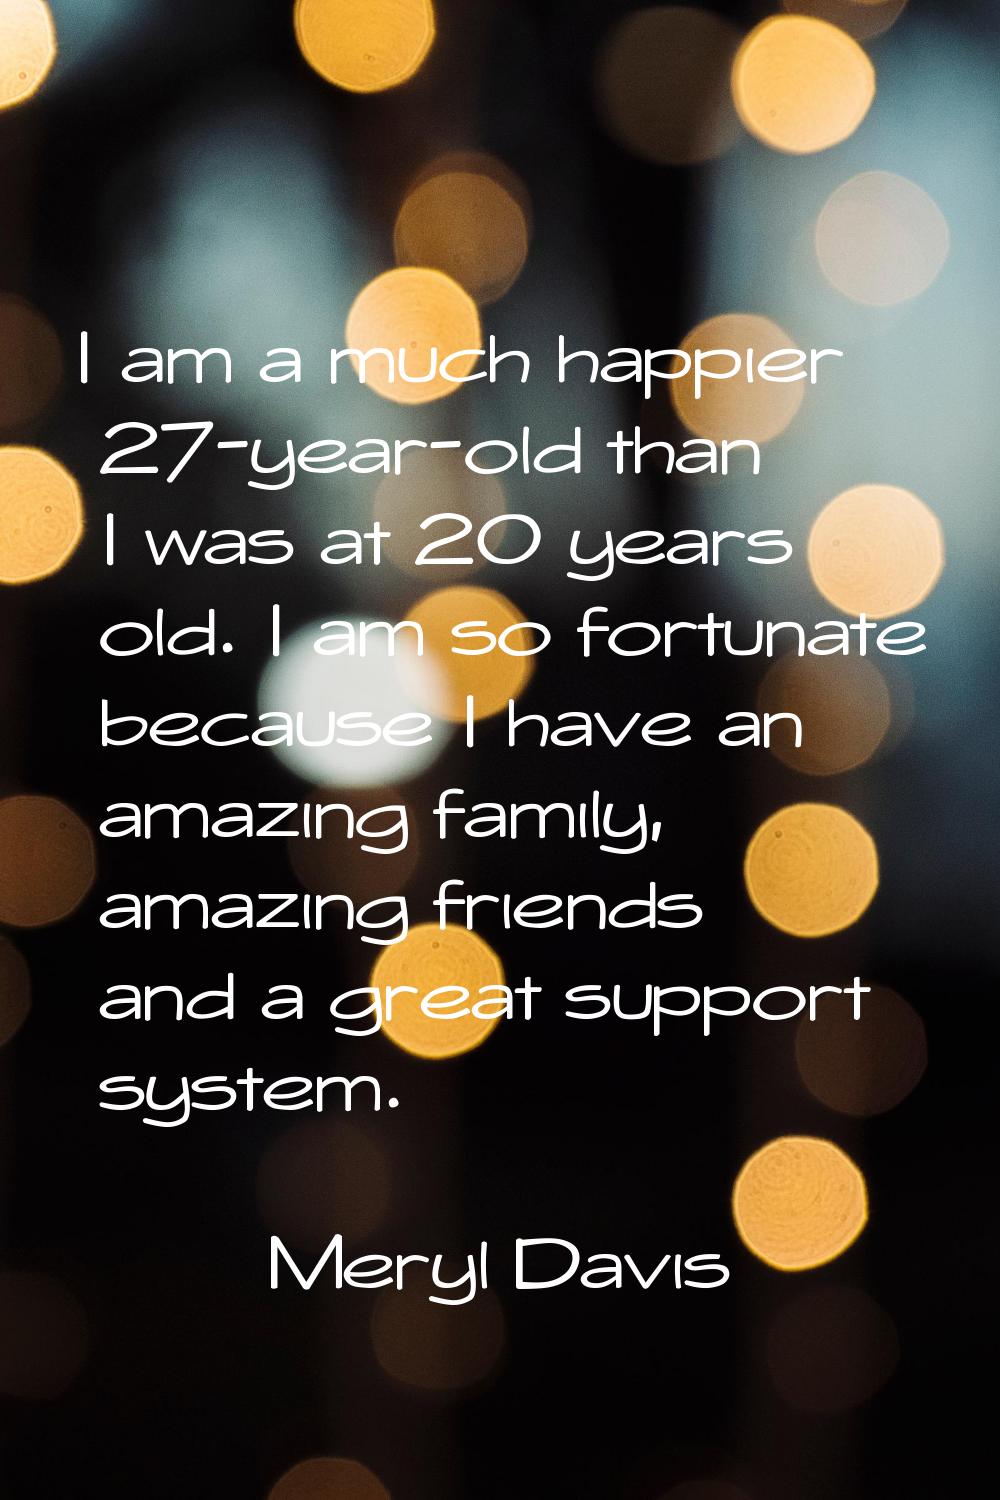 I am a much happier 27-year-old than I was at 20 years old. I am so fortunate because I have an ama